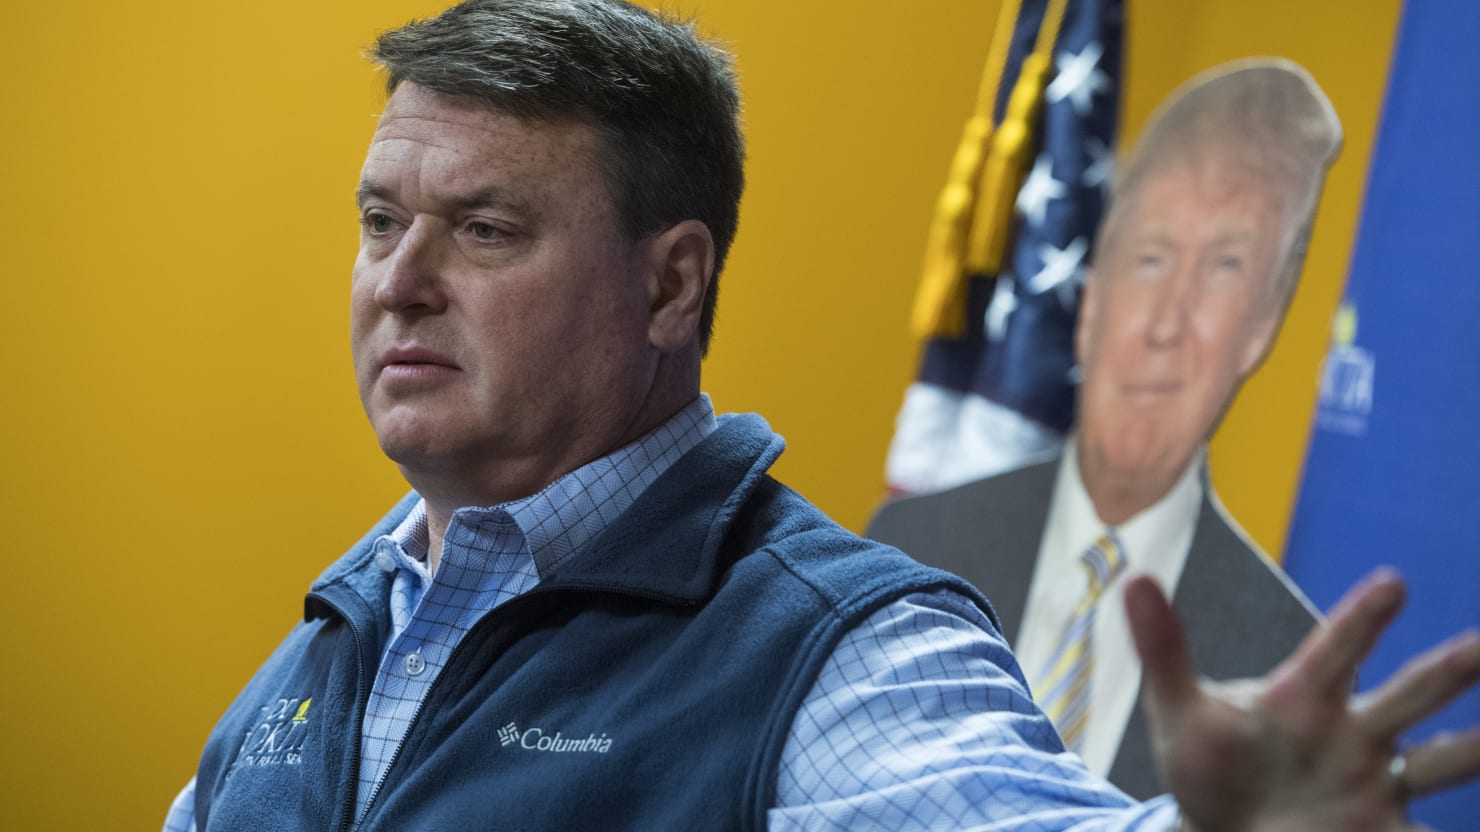 Indiana AG Todd Rokita Escalates War on Caitlin Bernard Doctor Who Performed 10-Year-Old Girl’s Abortion – The Daily Beast